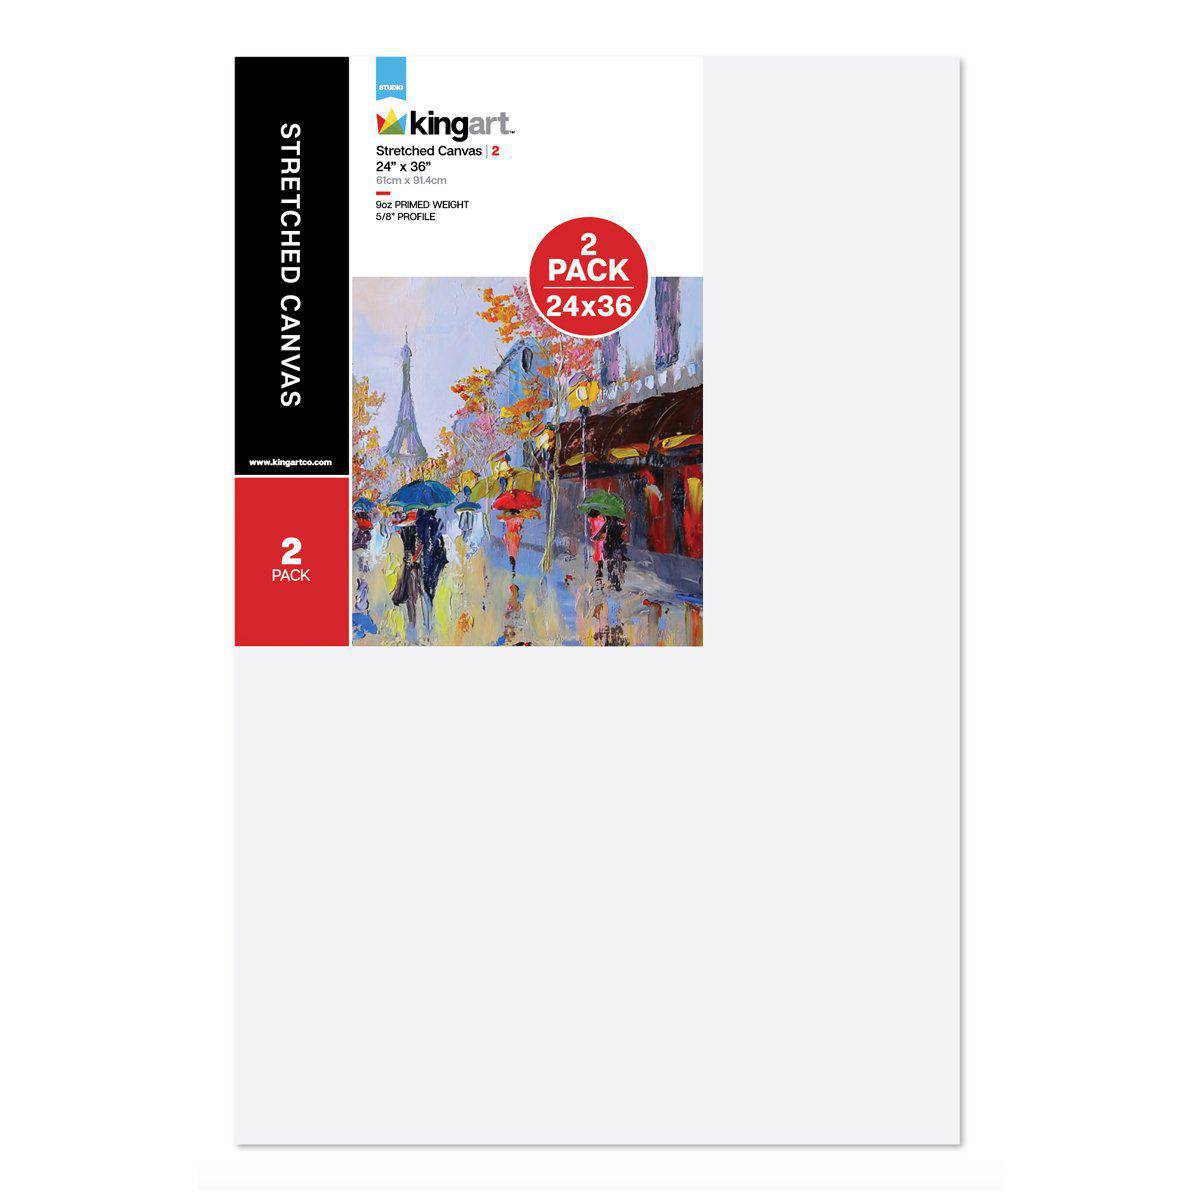 White Canvas Panels 24x36 12 Pack Professional Cotton Artist Quality Acid Free Primed Canvas Boards for , Oil and Wet or Dry Art Media for Crafts and